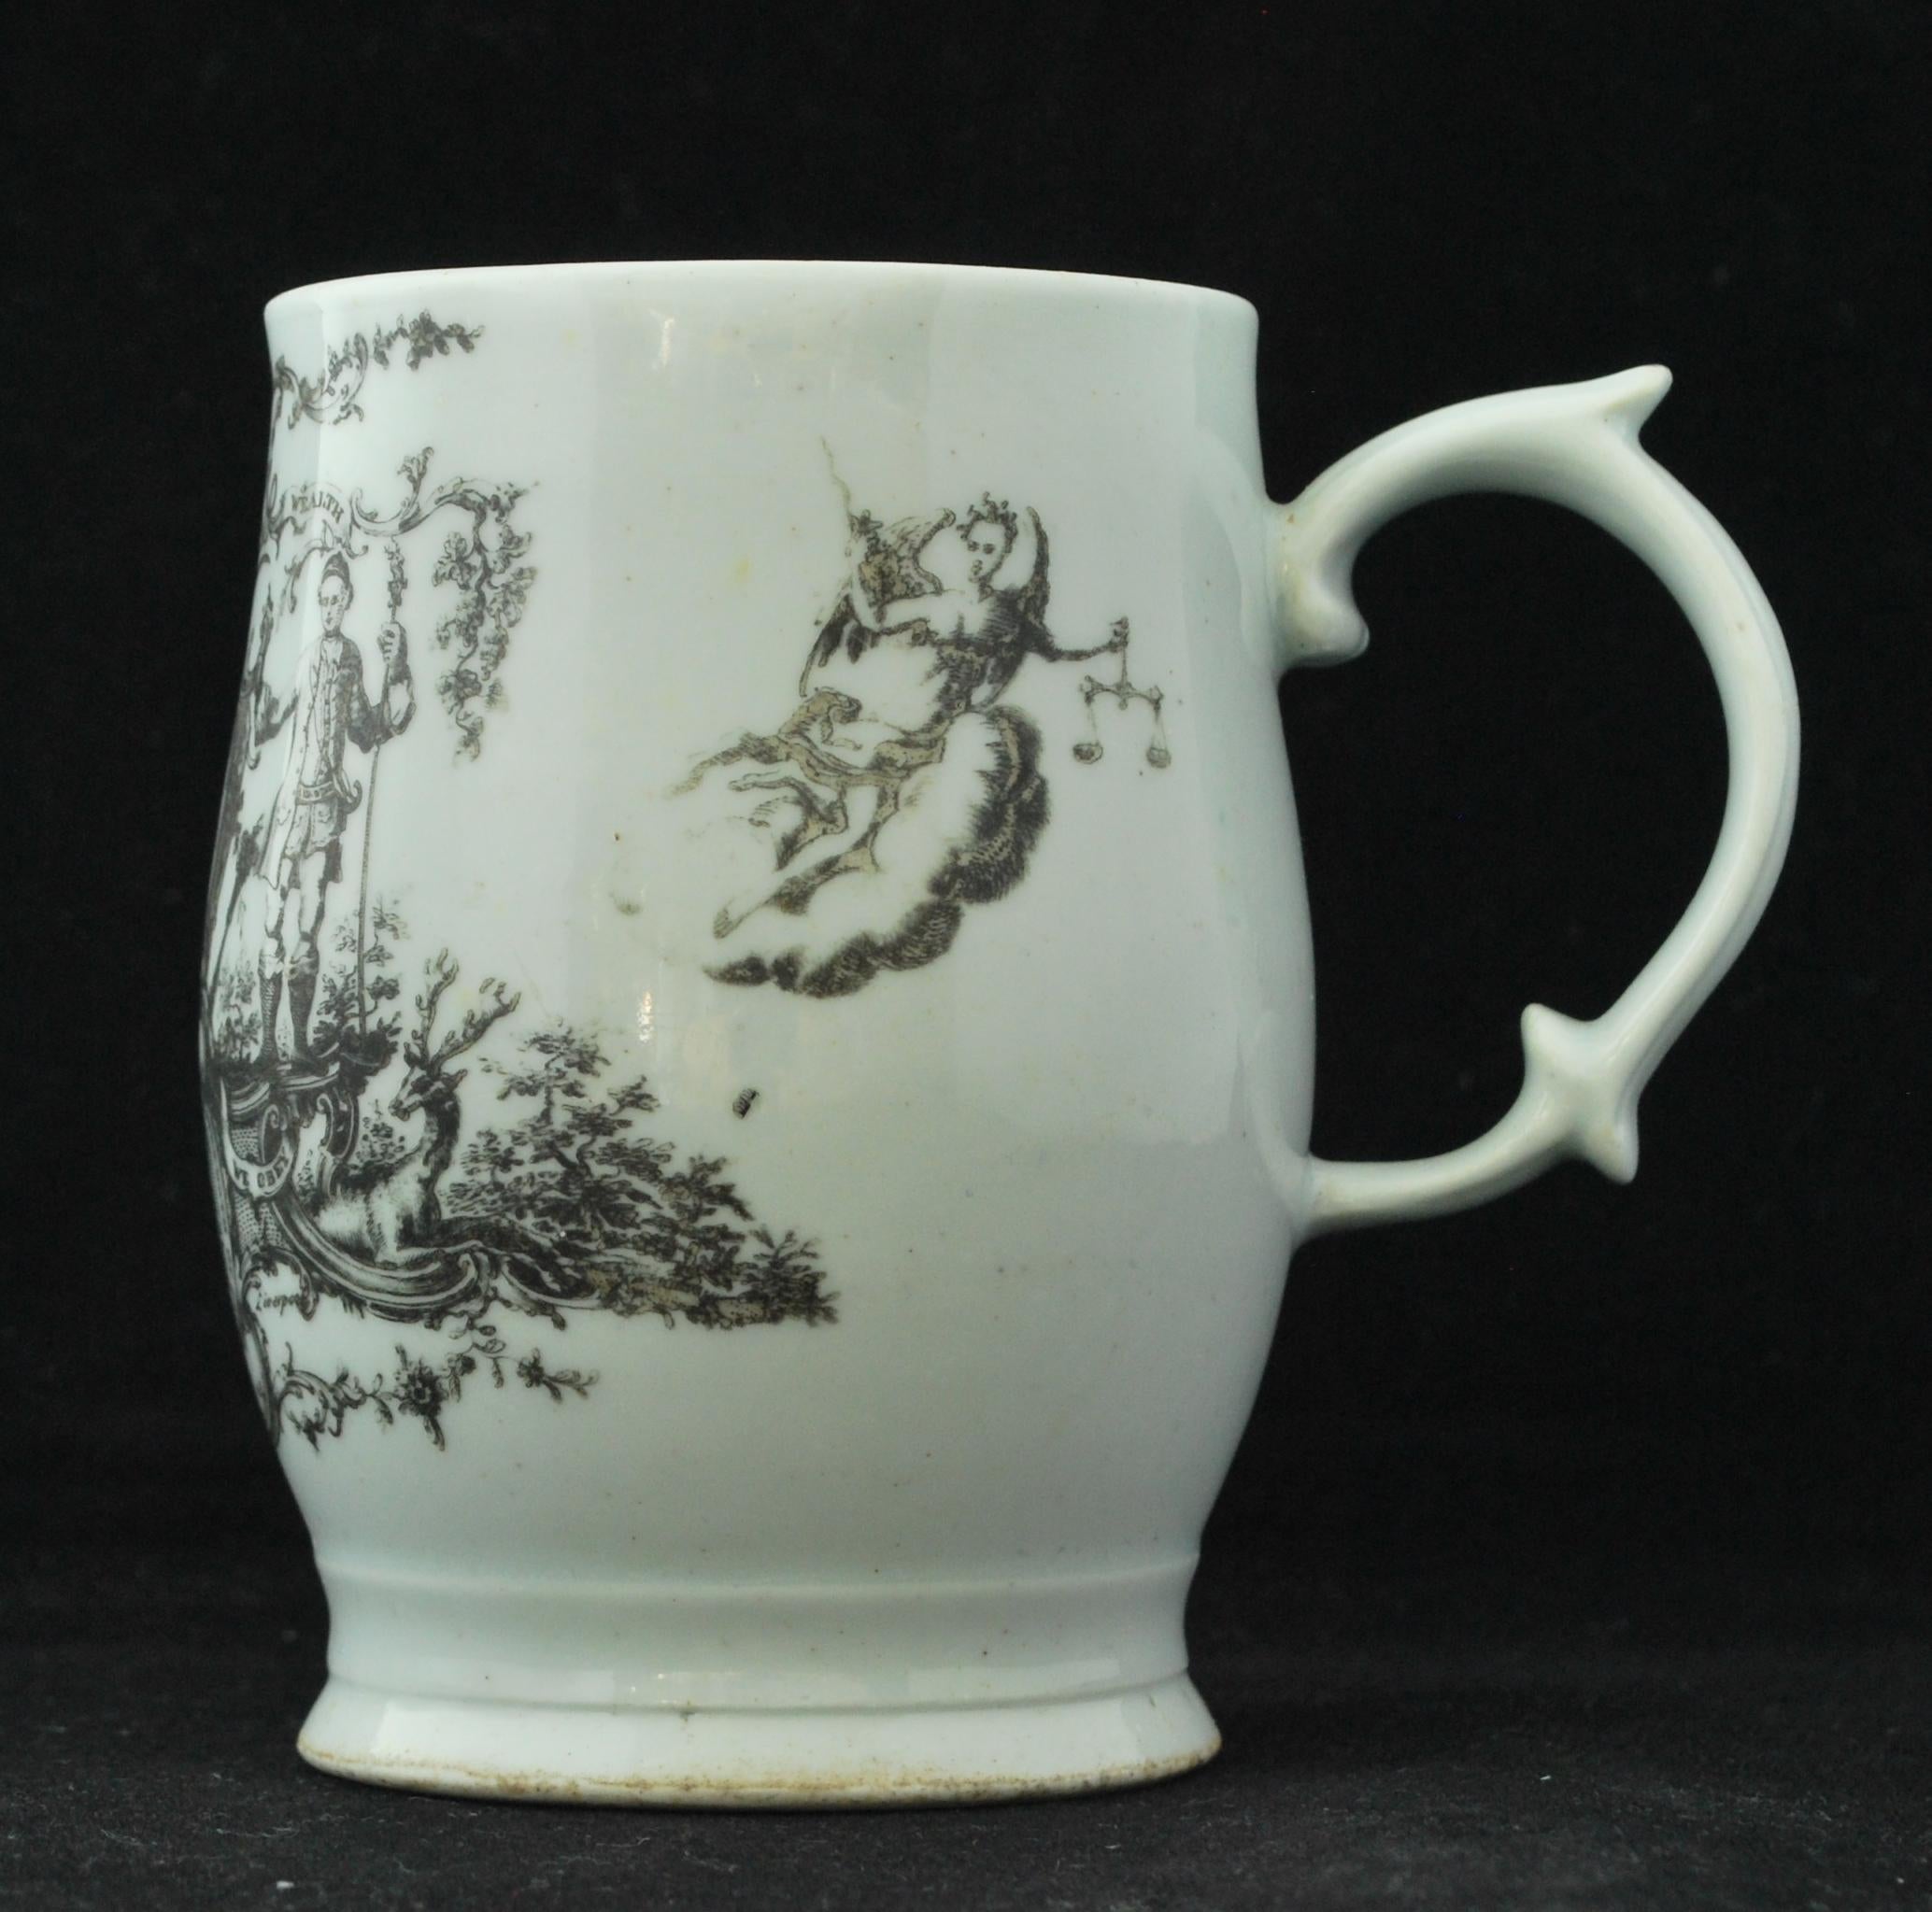 An attractive baluster-shaped mug, decorated with the coat of arms for the Bucks Society. Good, crisp print by Sadler & Green and the mug in excellent condition.

Provenance: Billie Paine collection.